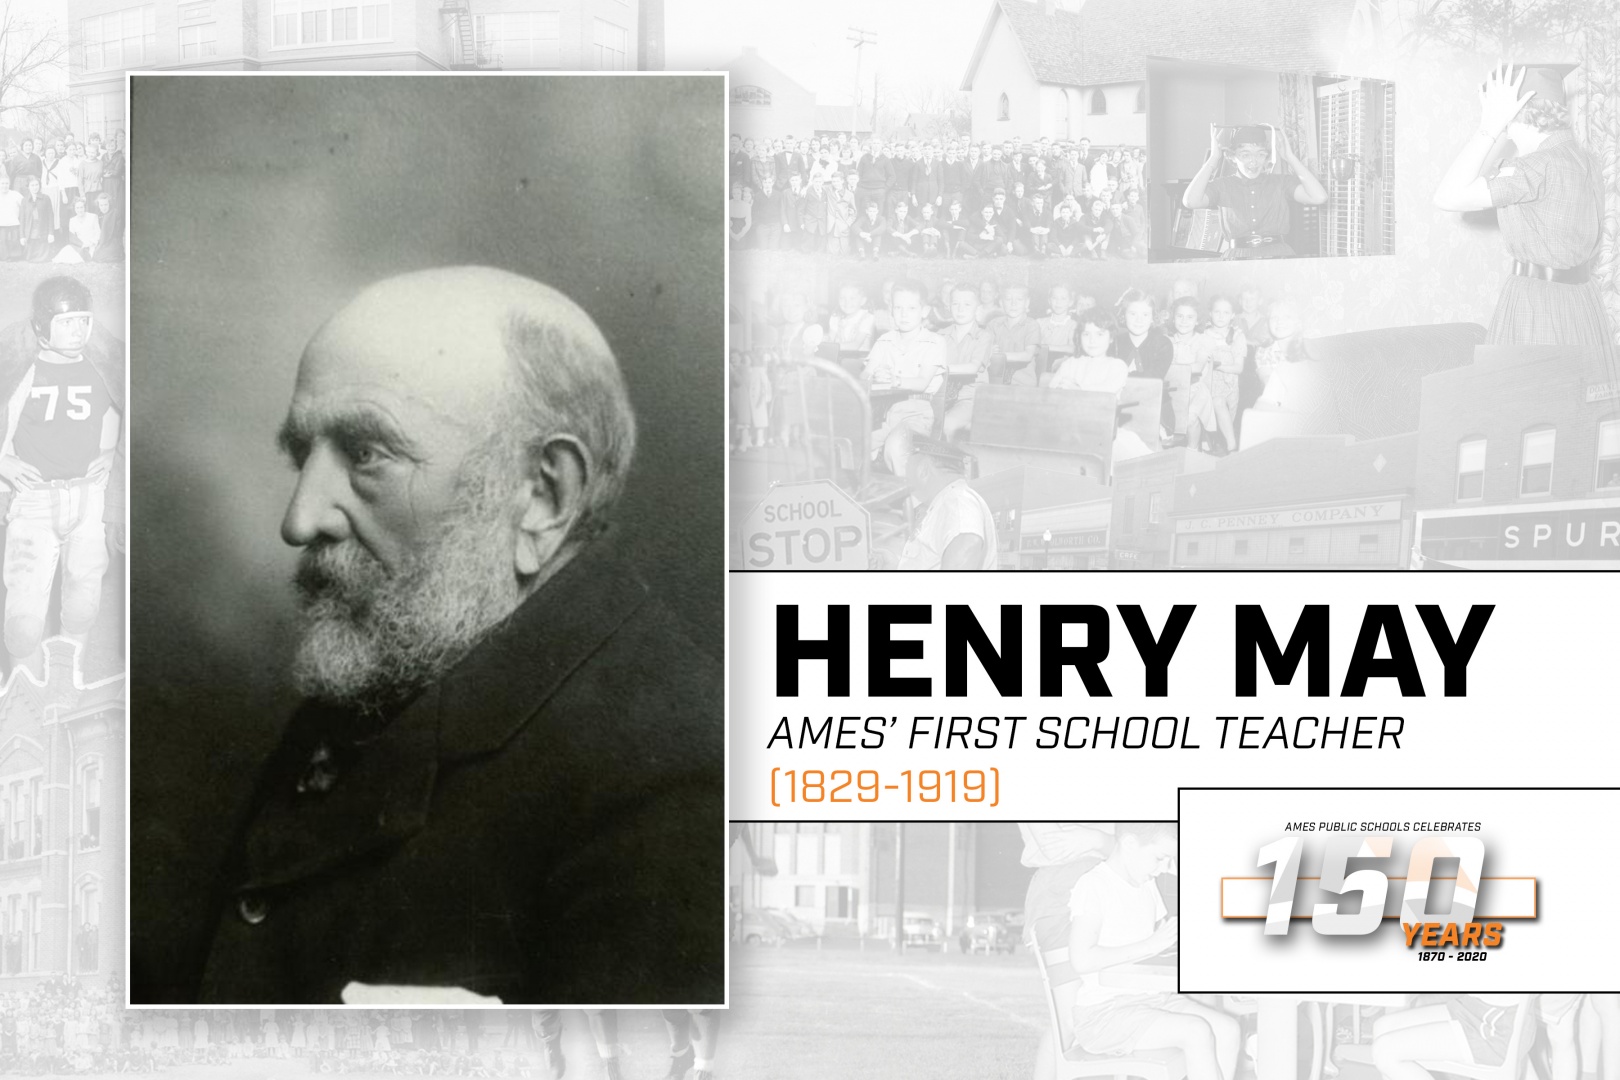 Henry May: Ames’ First School Teacher (1829-1919)